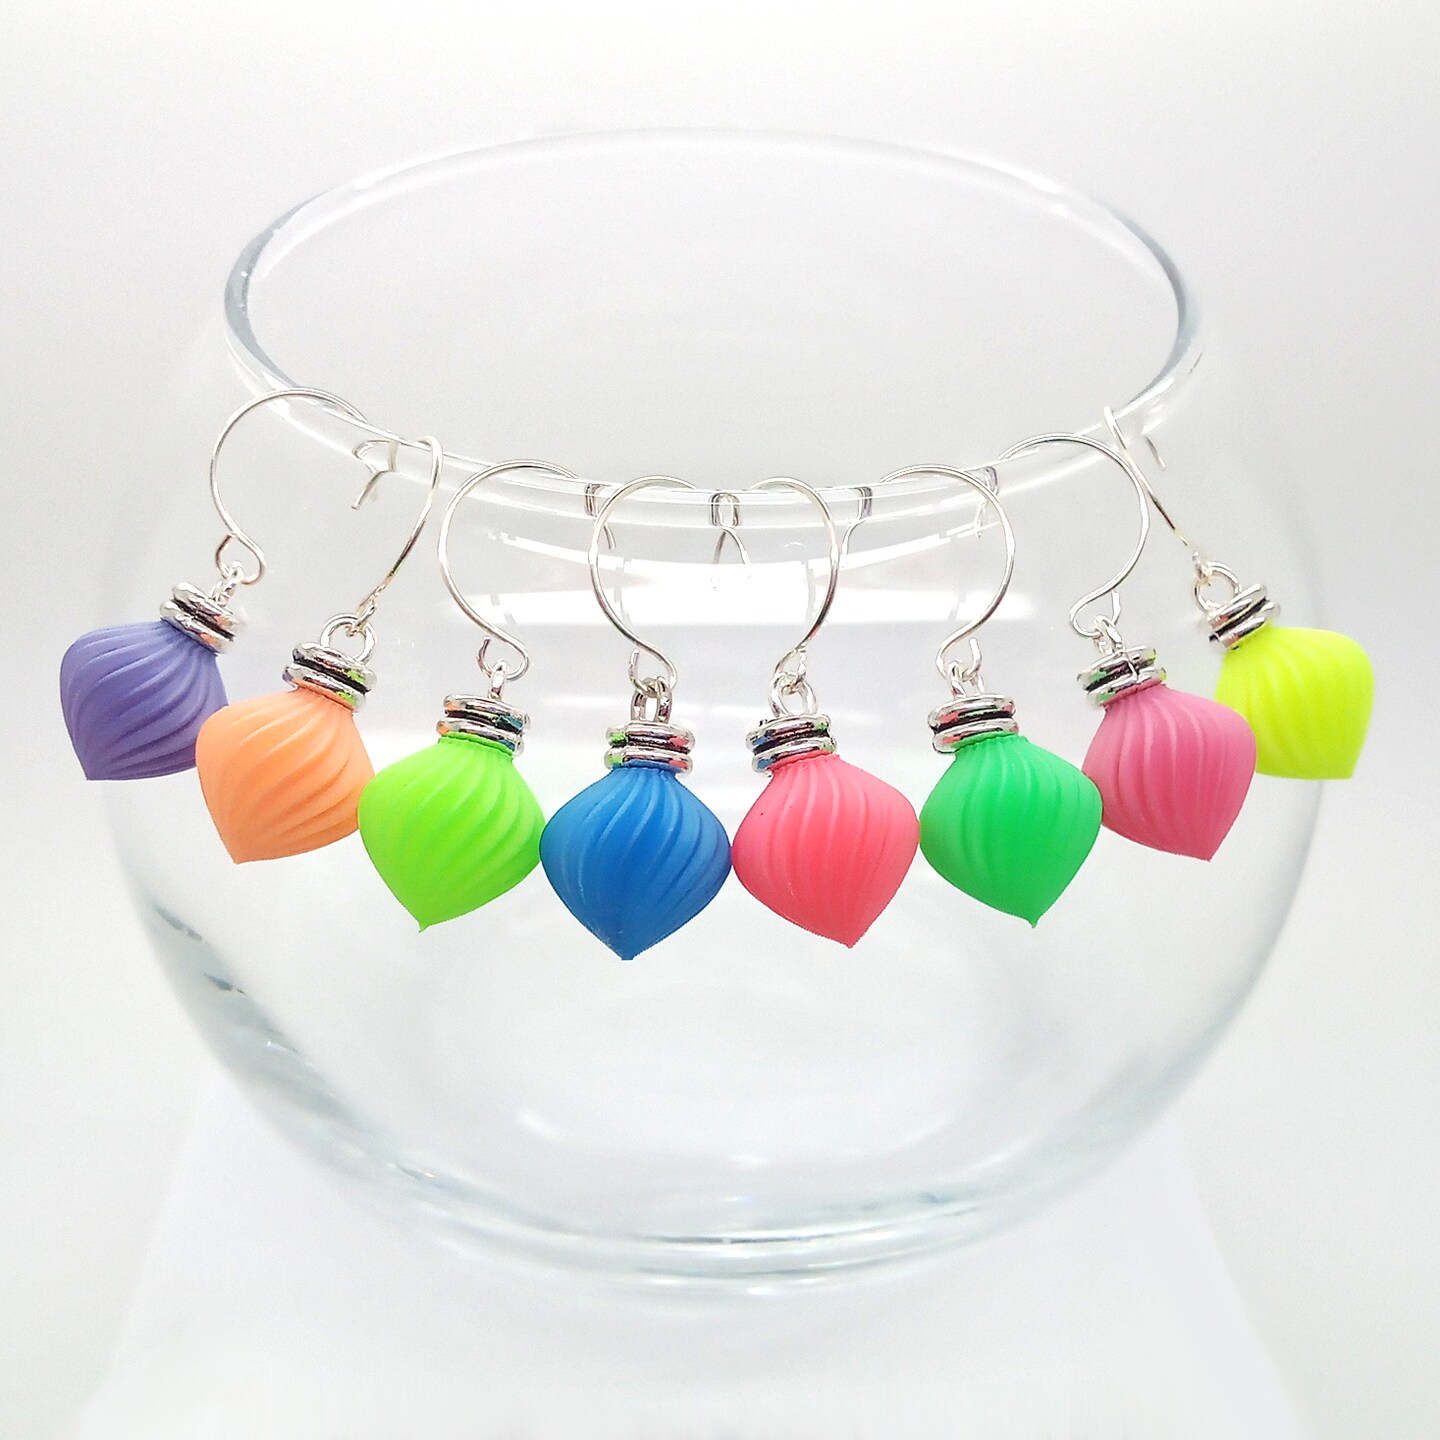 Miniature Ornaments in Bright Neon Colors, 8 pc Mix with Hangers, for Tiny Christmas Trees, Adorabilities